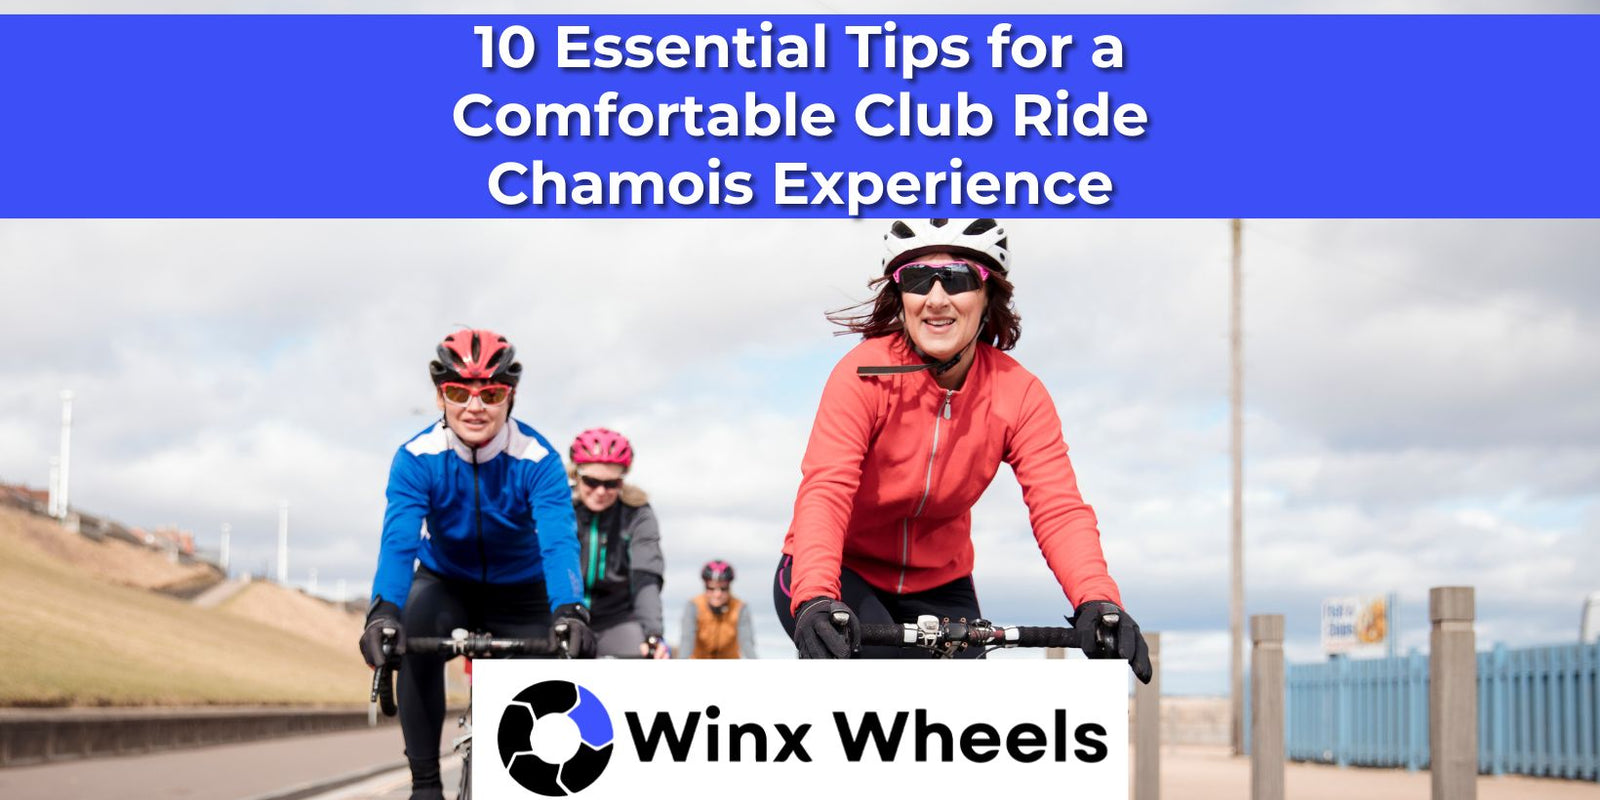 10 Essential Tips for a Comfortable Club Ride Chamois Experience